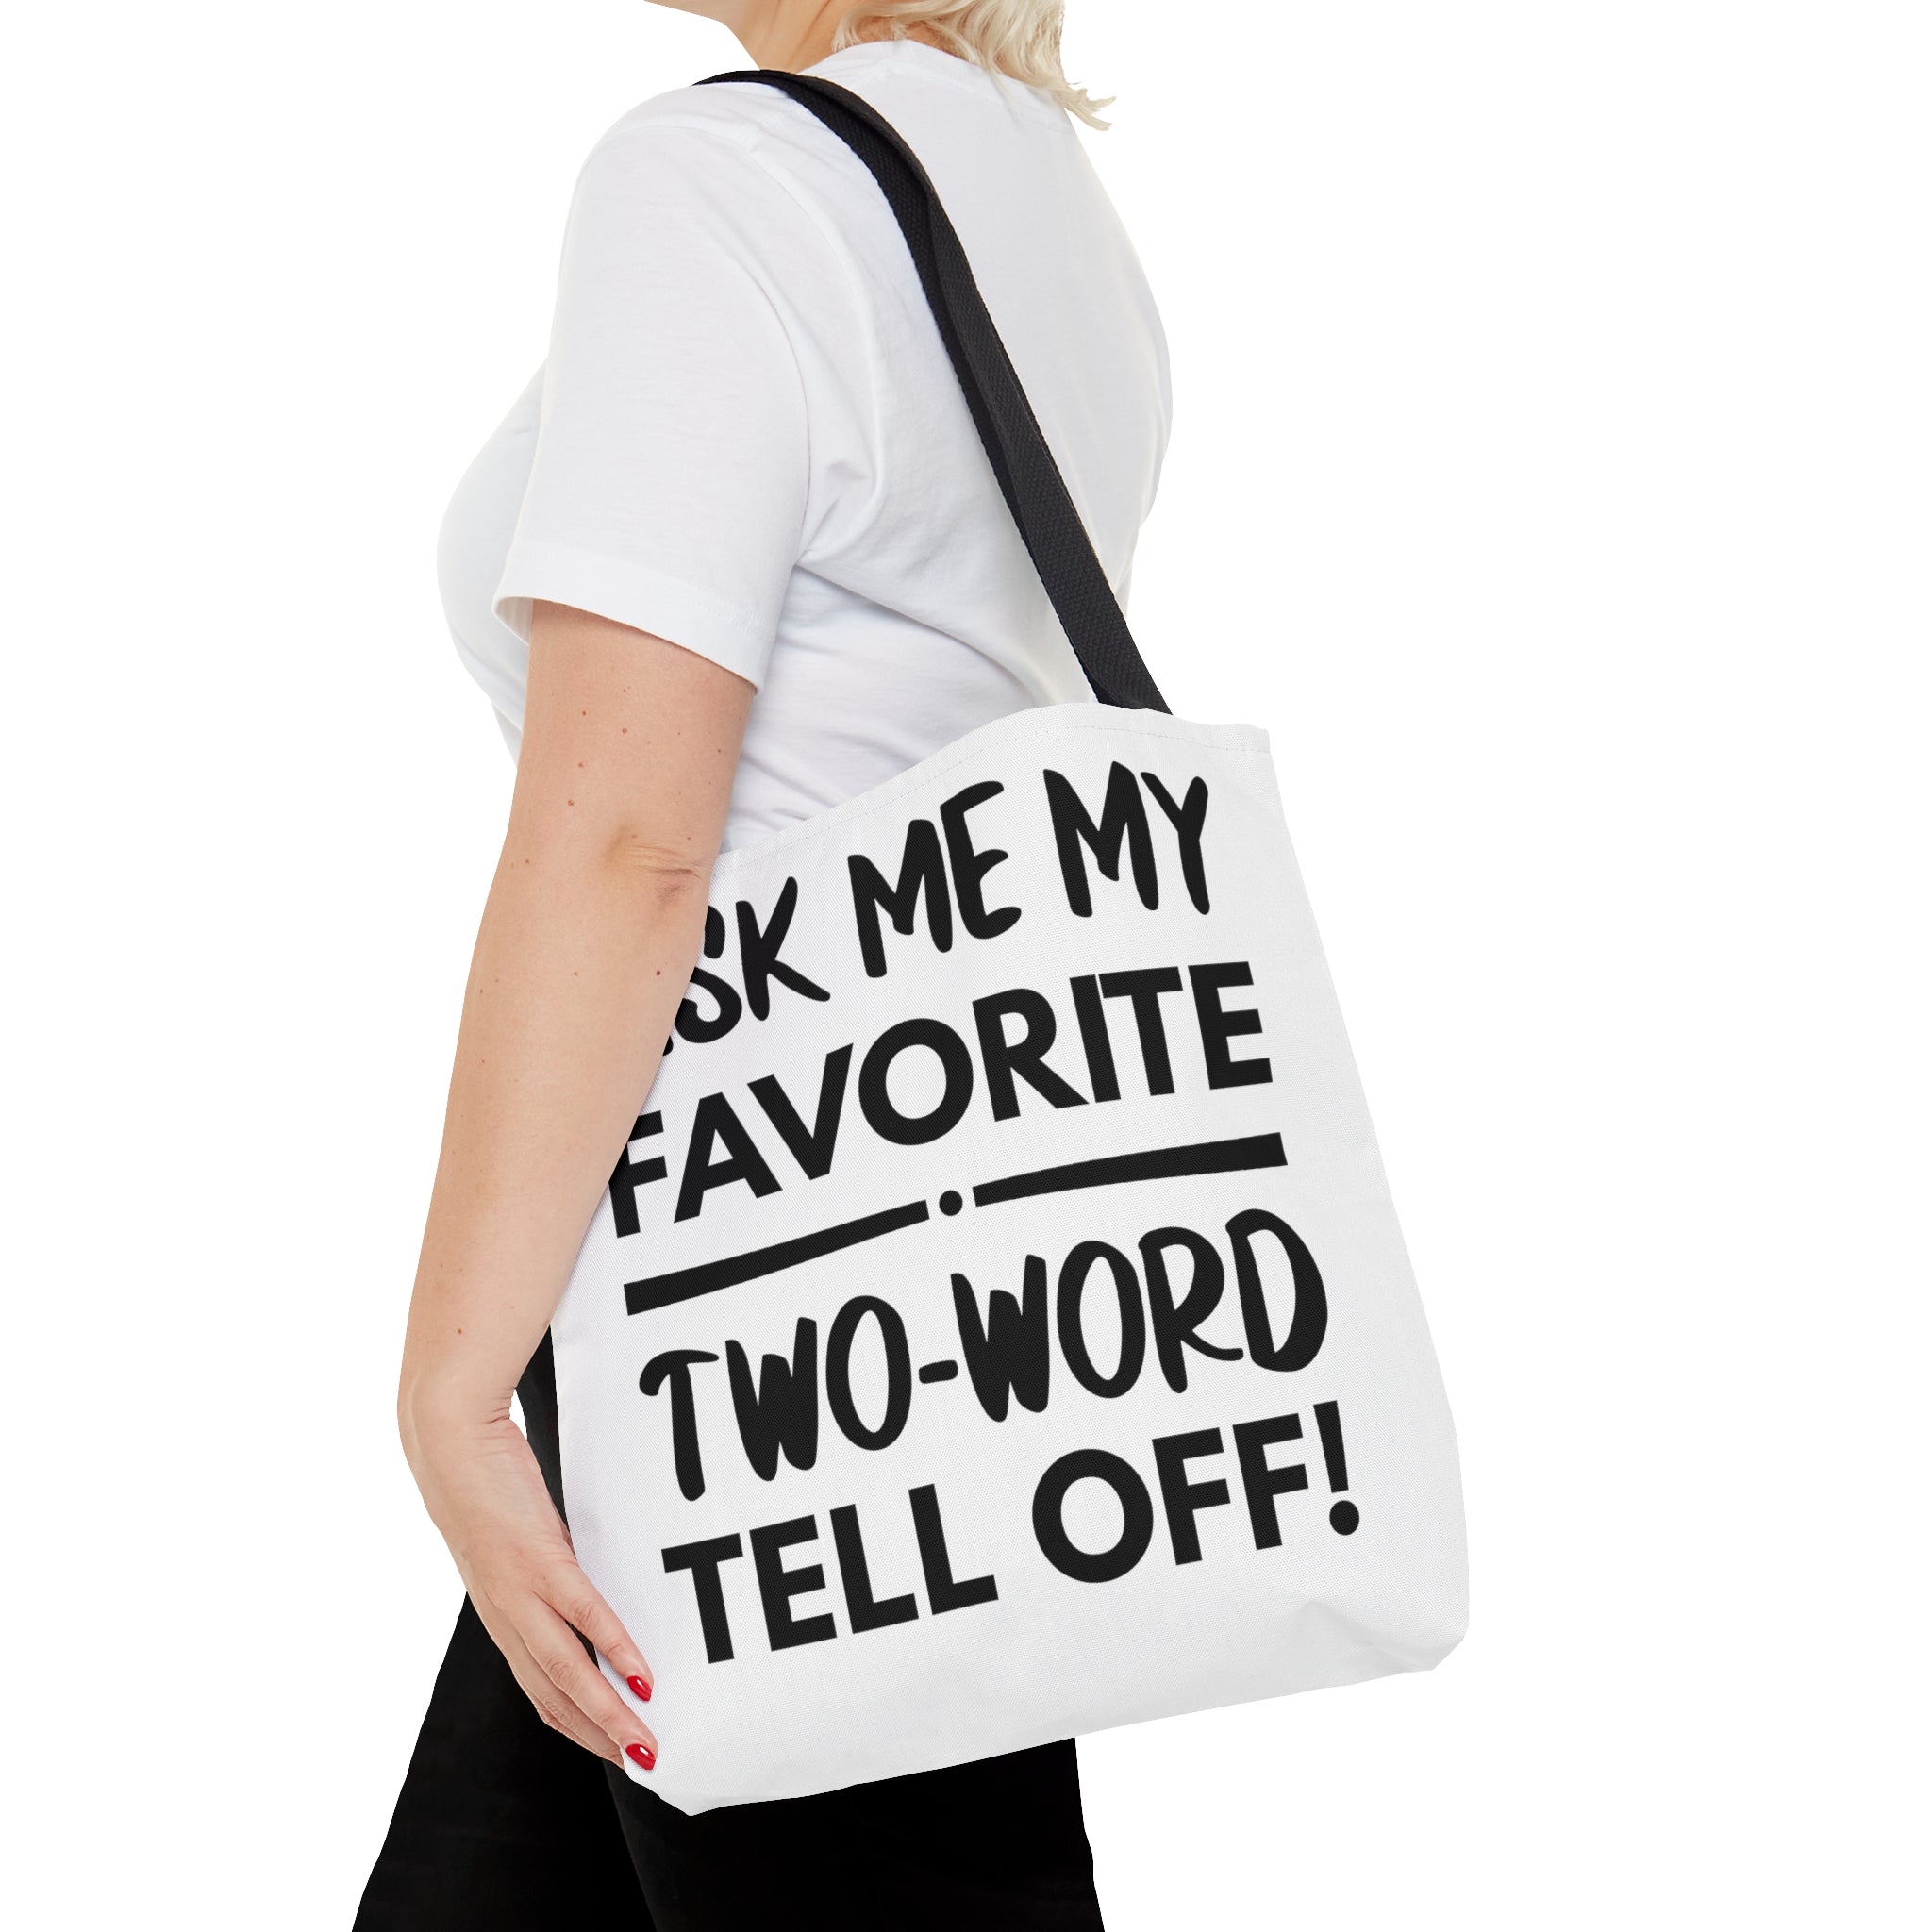 Two Word Tell-Off Tote Bag